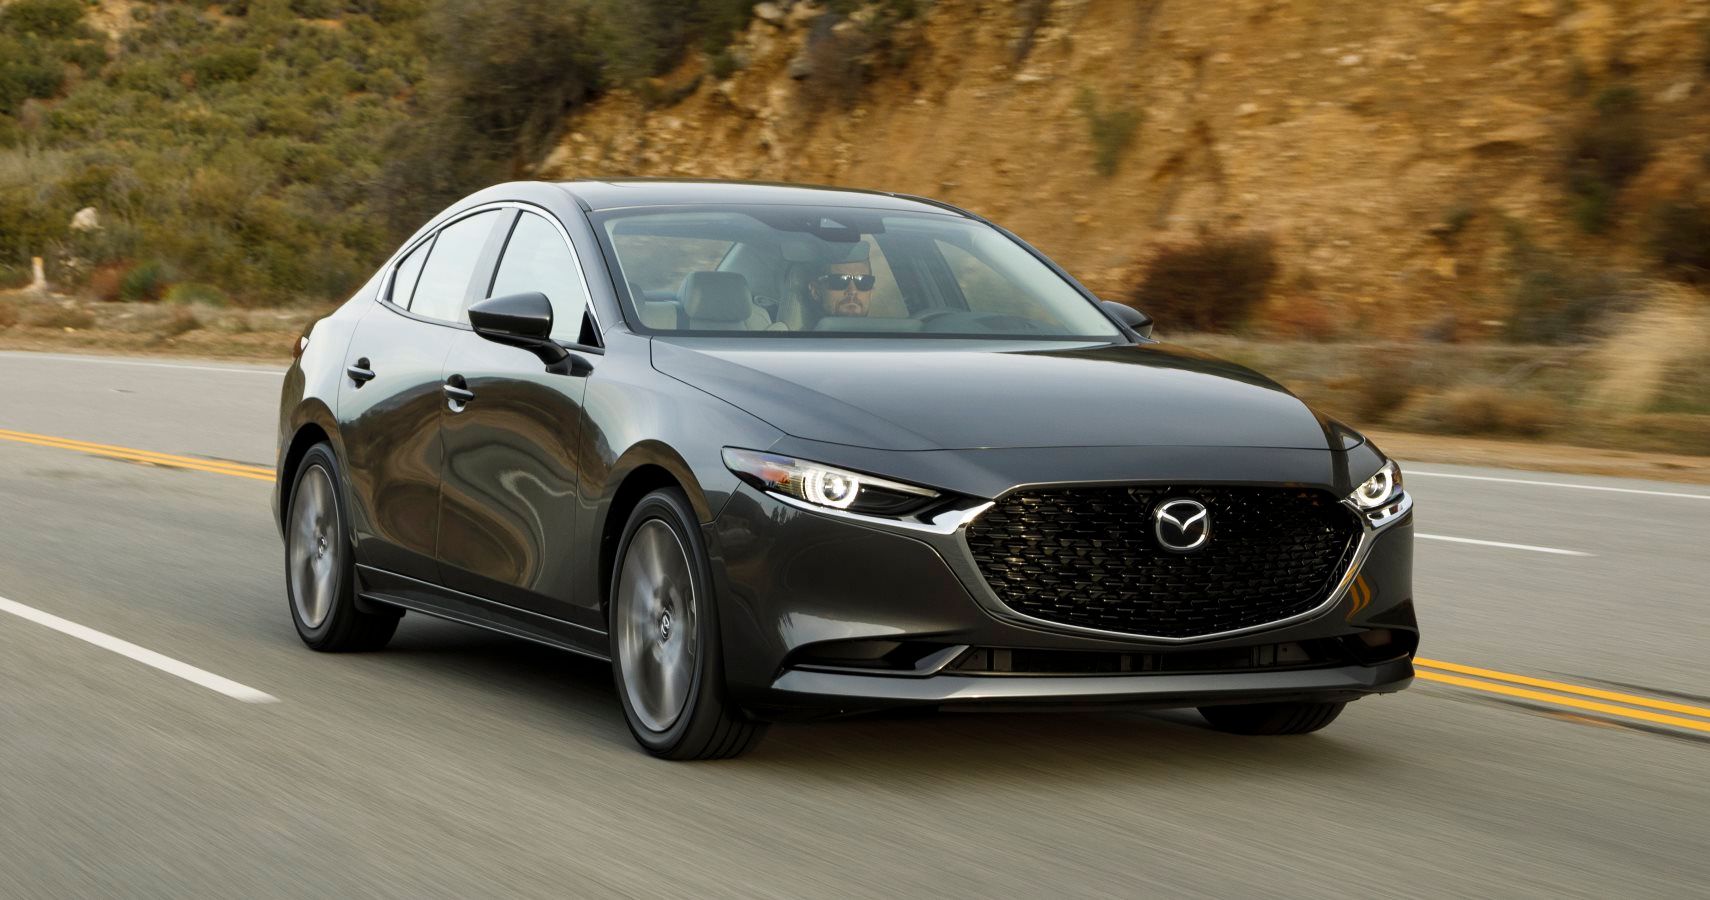 Mazda 3 Recalled Due To Issue Where The Wheels Roll Away Without A Car Attached